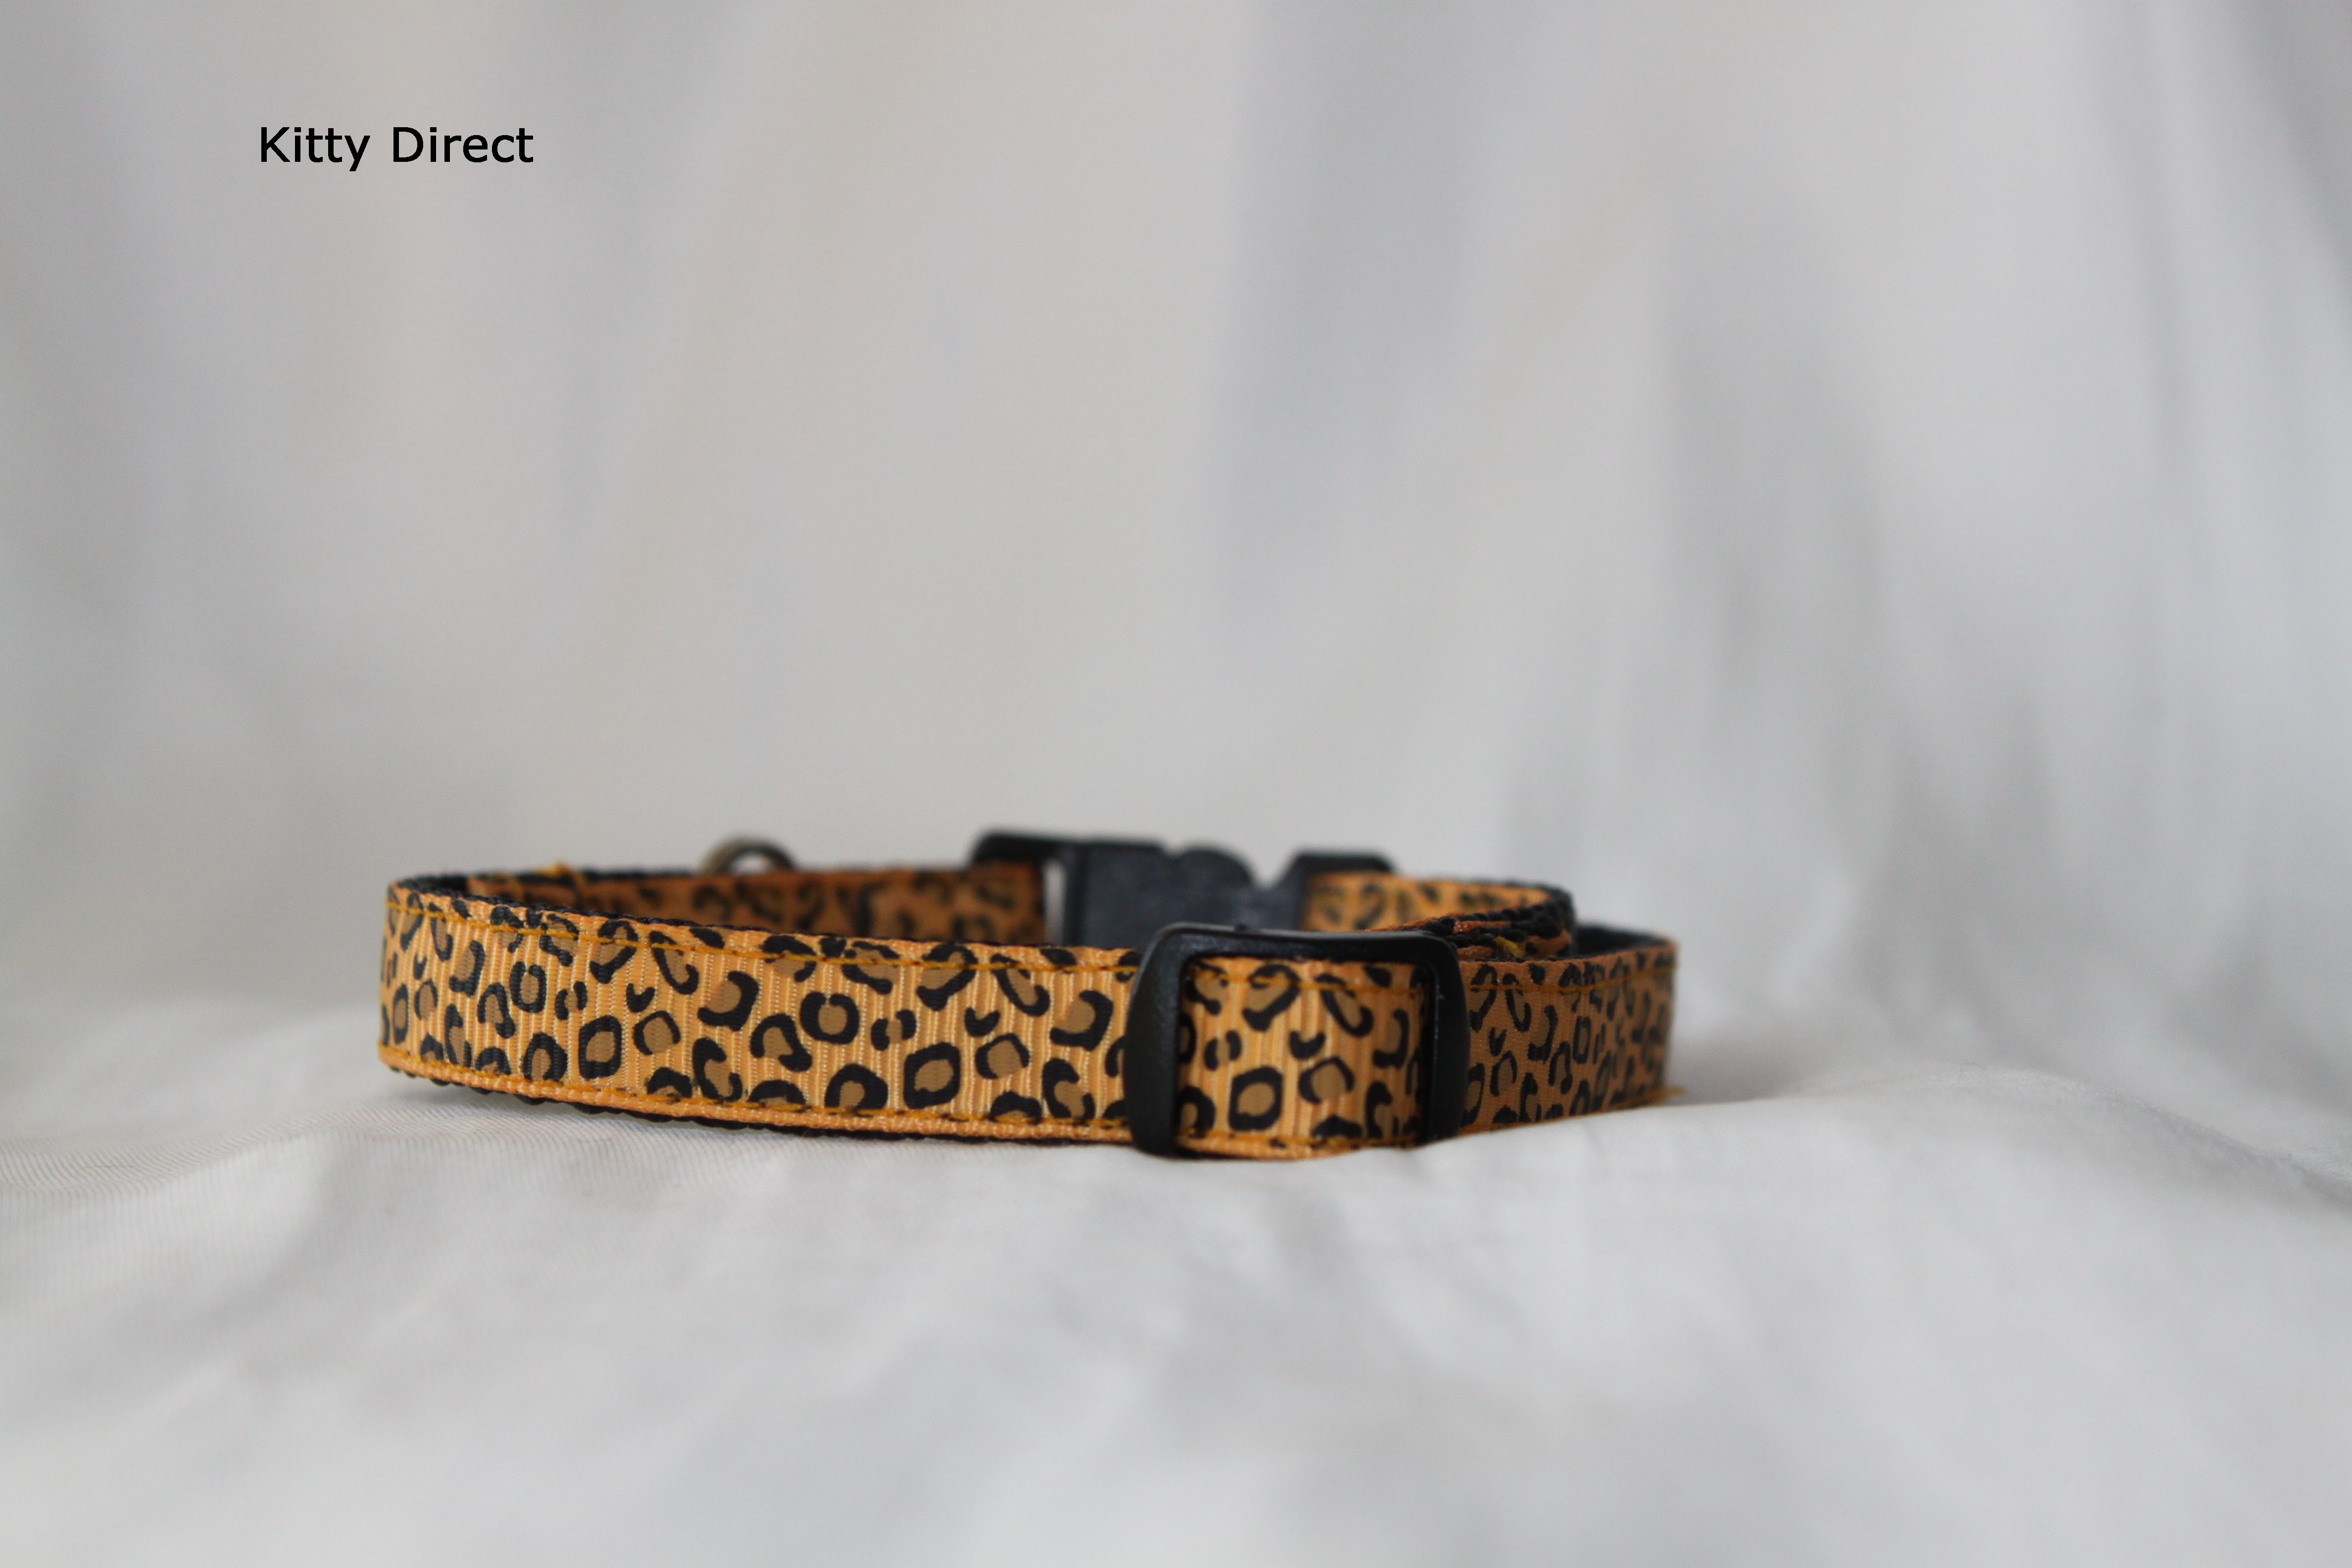 Metal Buckle Upgrade - Gold or Silver - Add to Any Collar Order (Non-B -  Made By Cleo